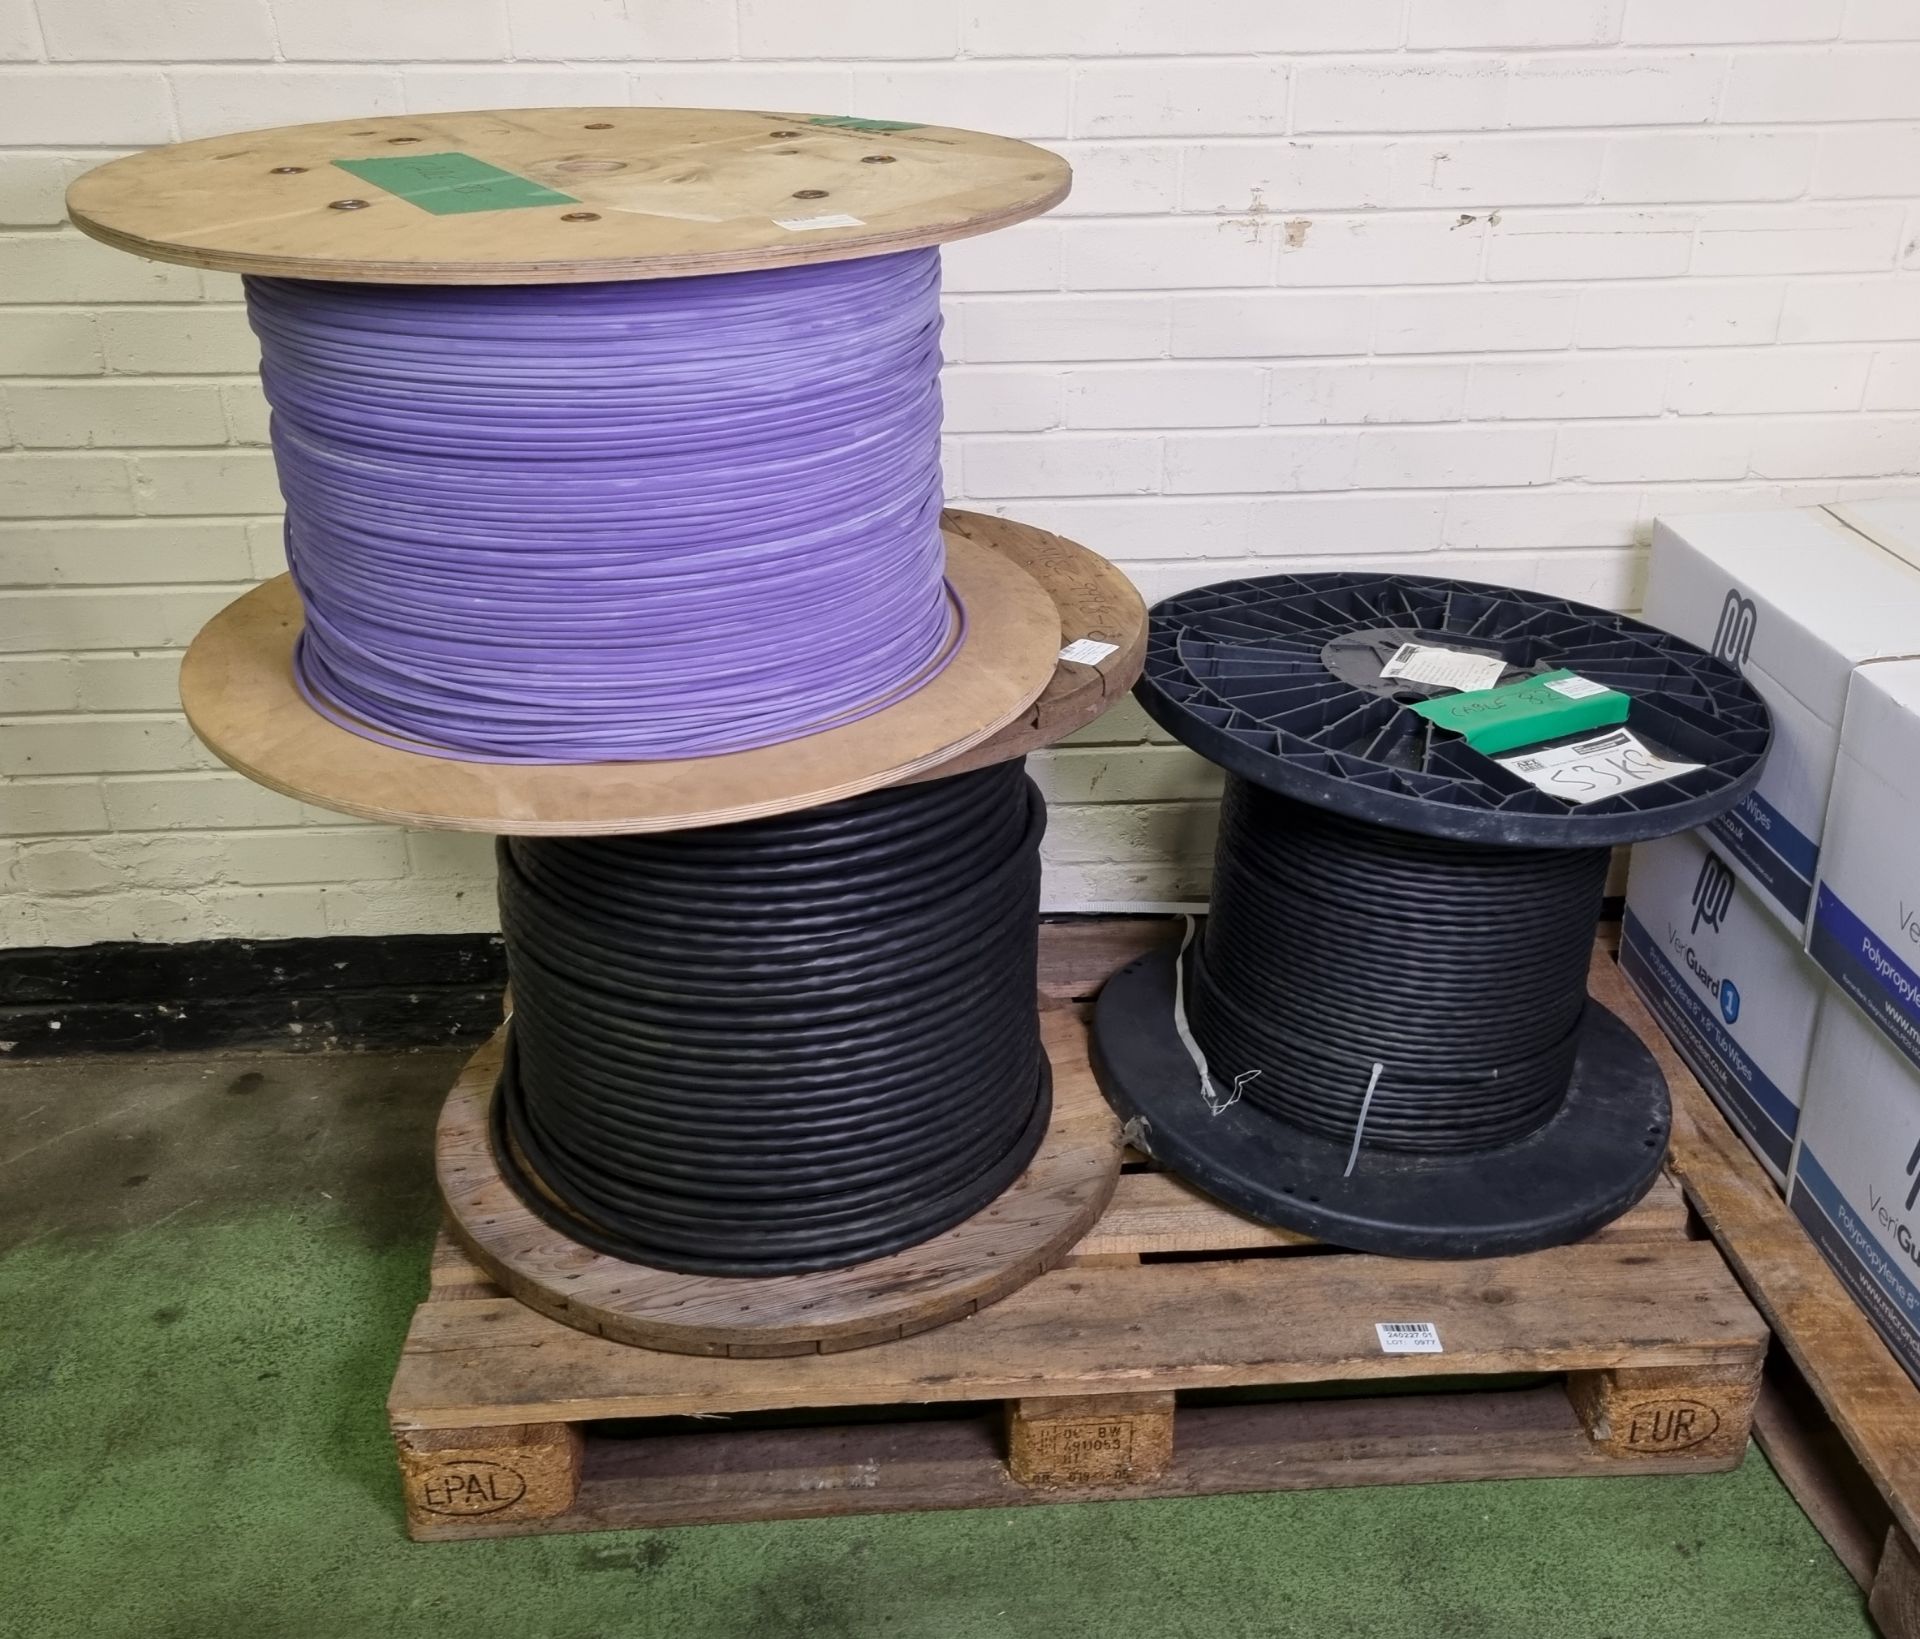 3x Reels of cable - see description for details